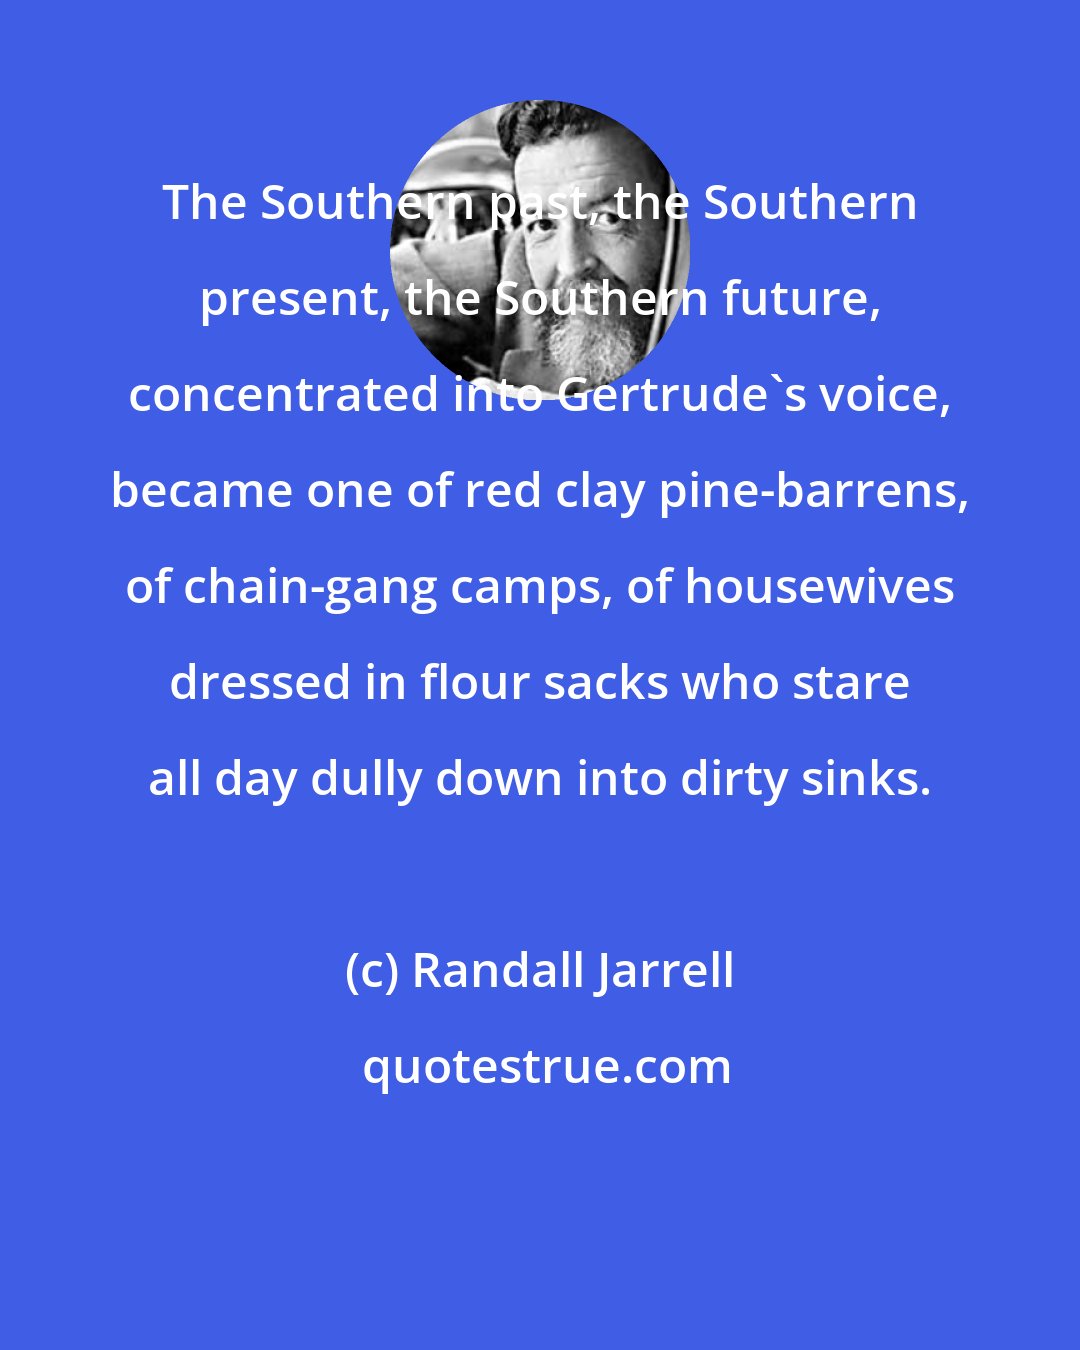 Randall Jarrell: The Southern past, the Southern present, the Southern future, concentrated into Gertrude's voice, became one of red clay pine-barrens, of chain-gang camps, of housewives dressed in flour sacks who stare all day dully down into dirty sinks.